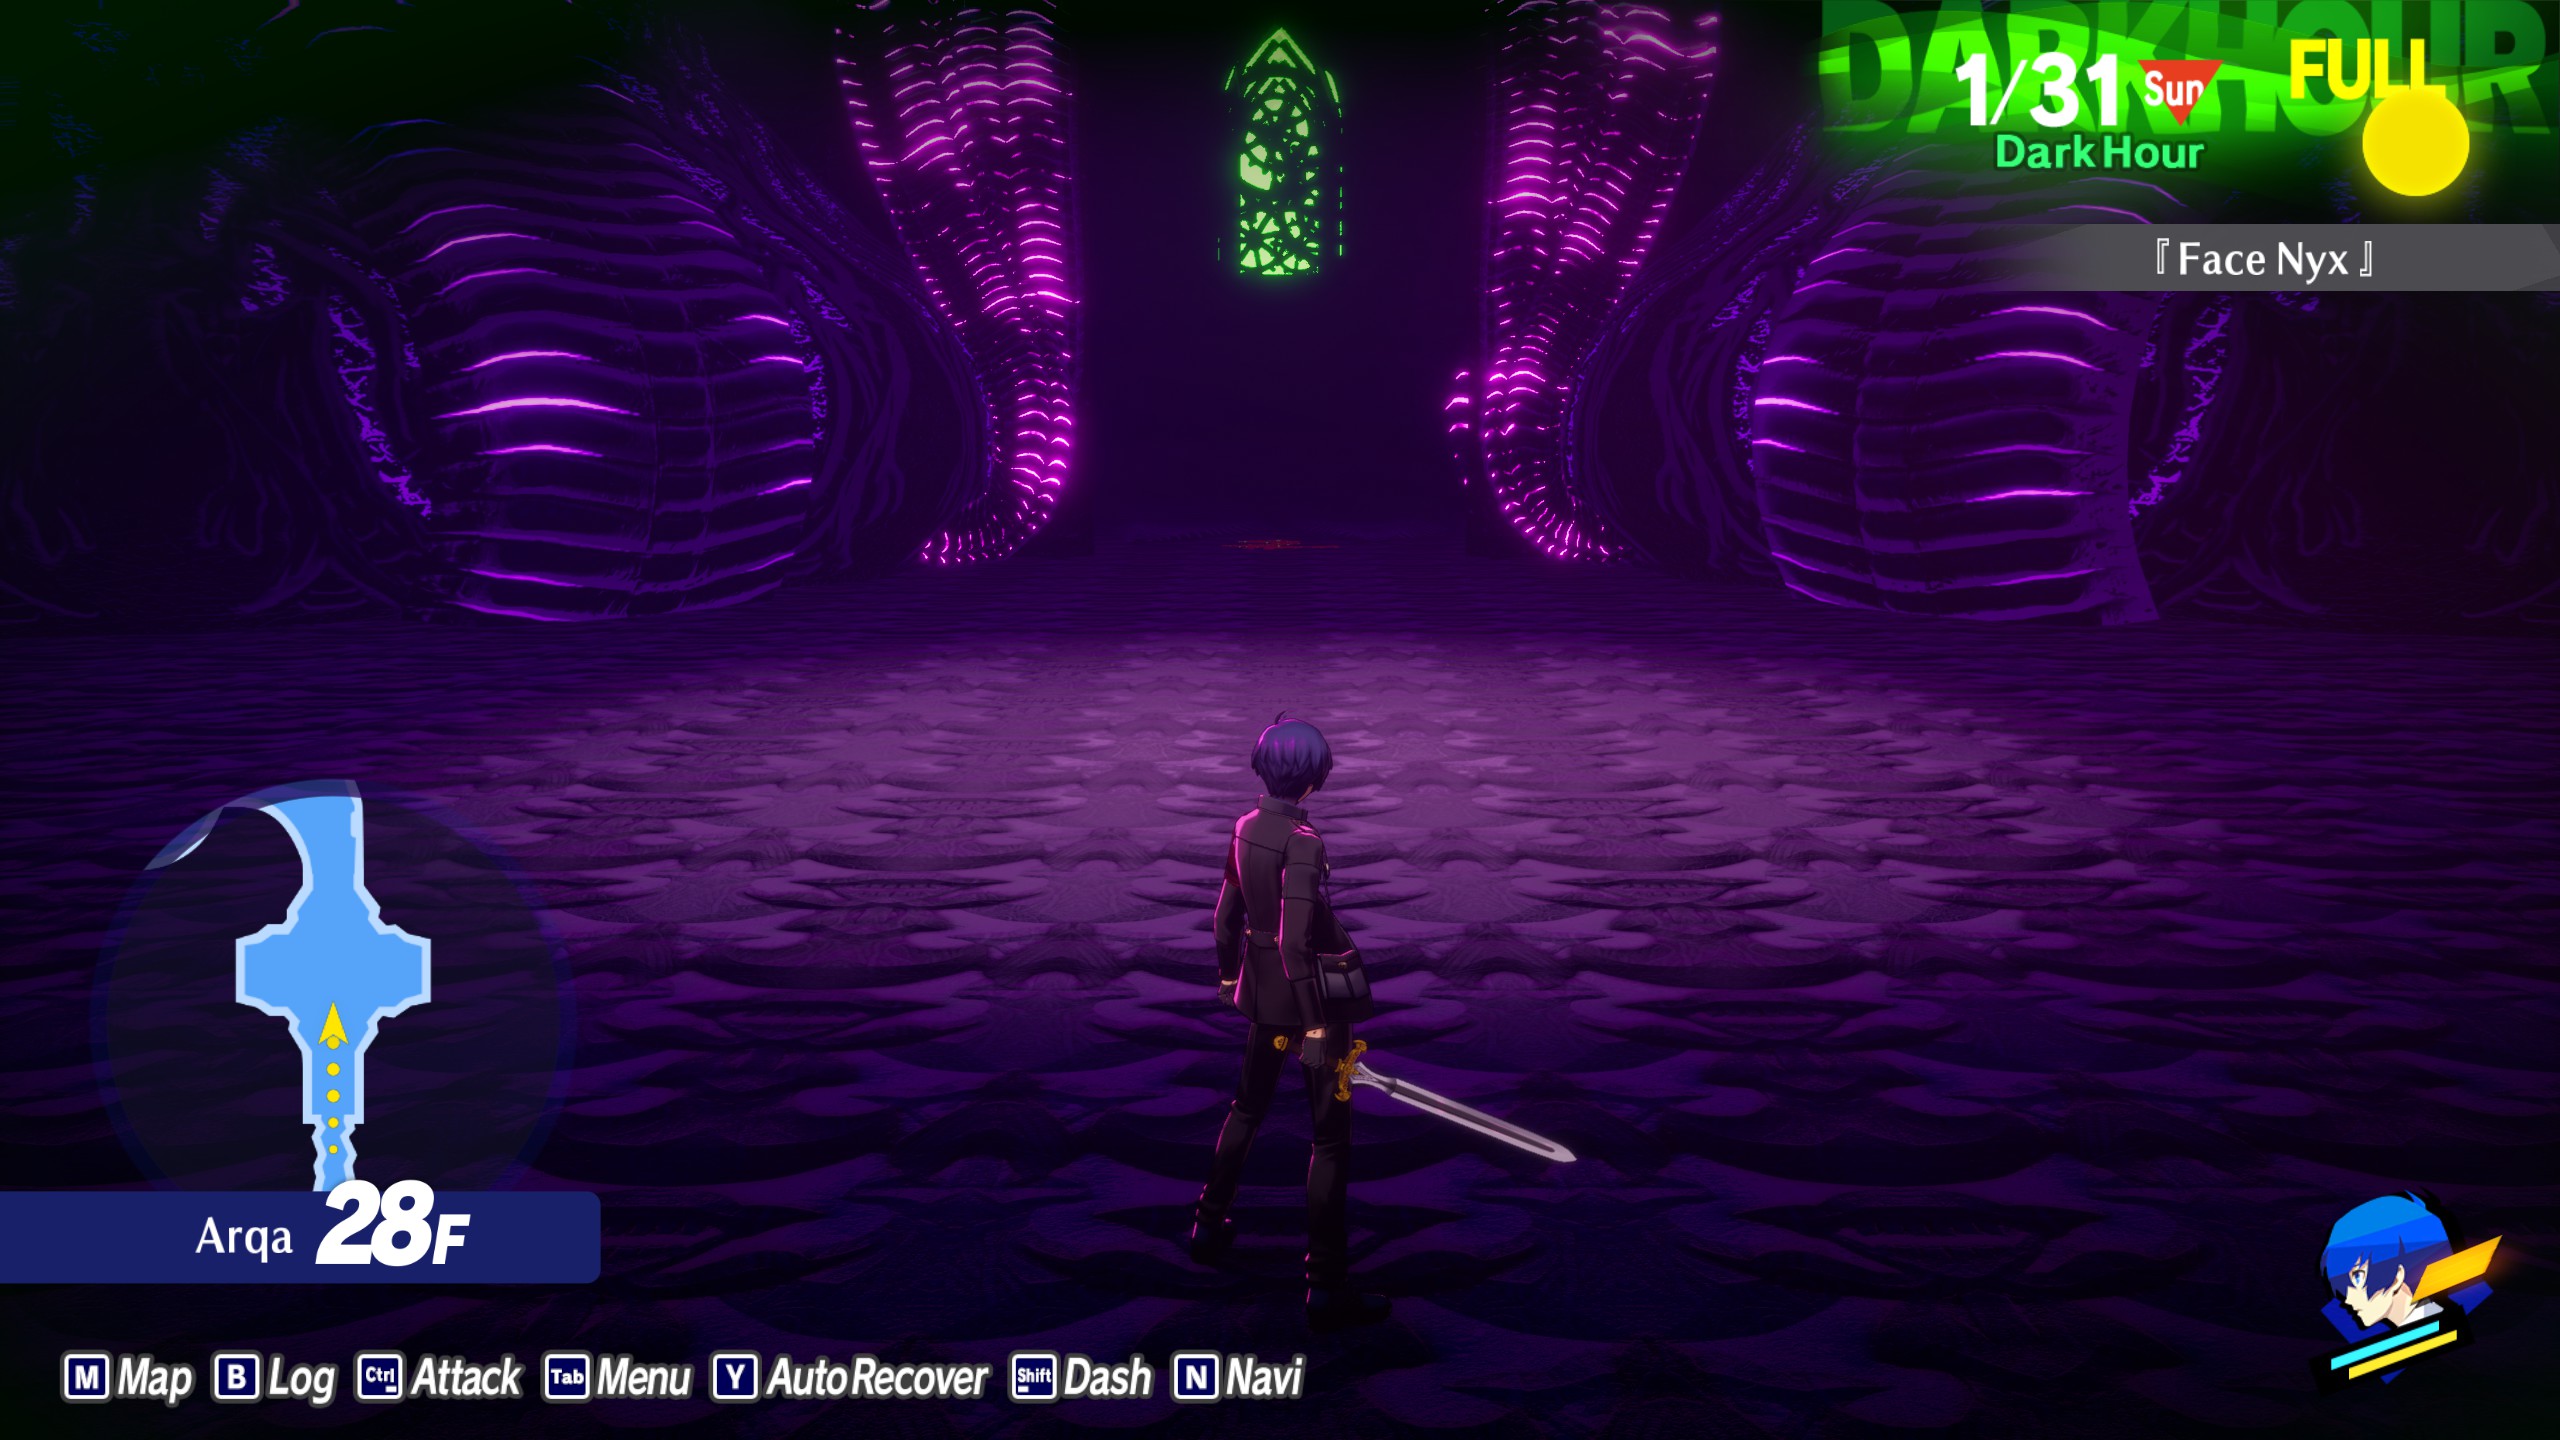 An image of the Arqa block in Persona 3 Reload.